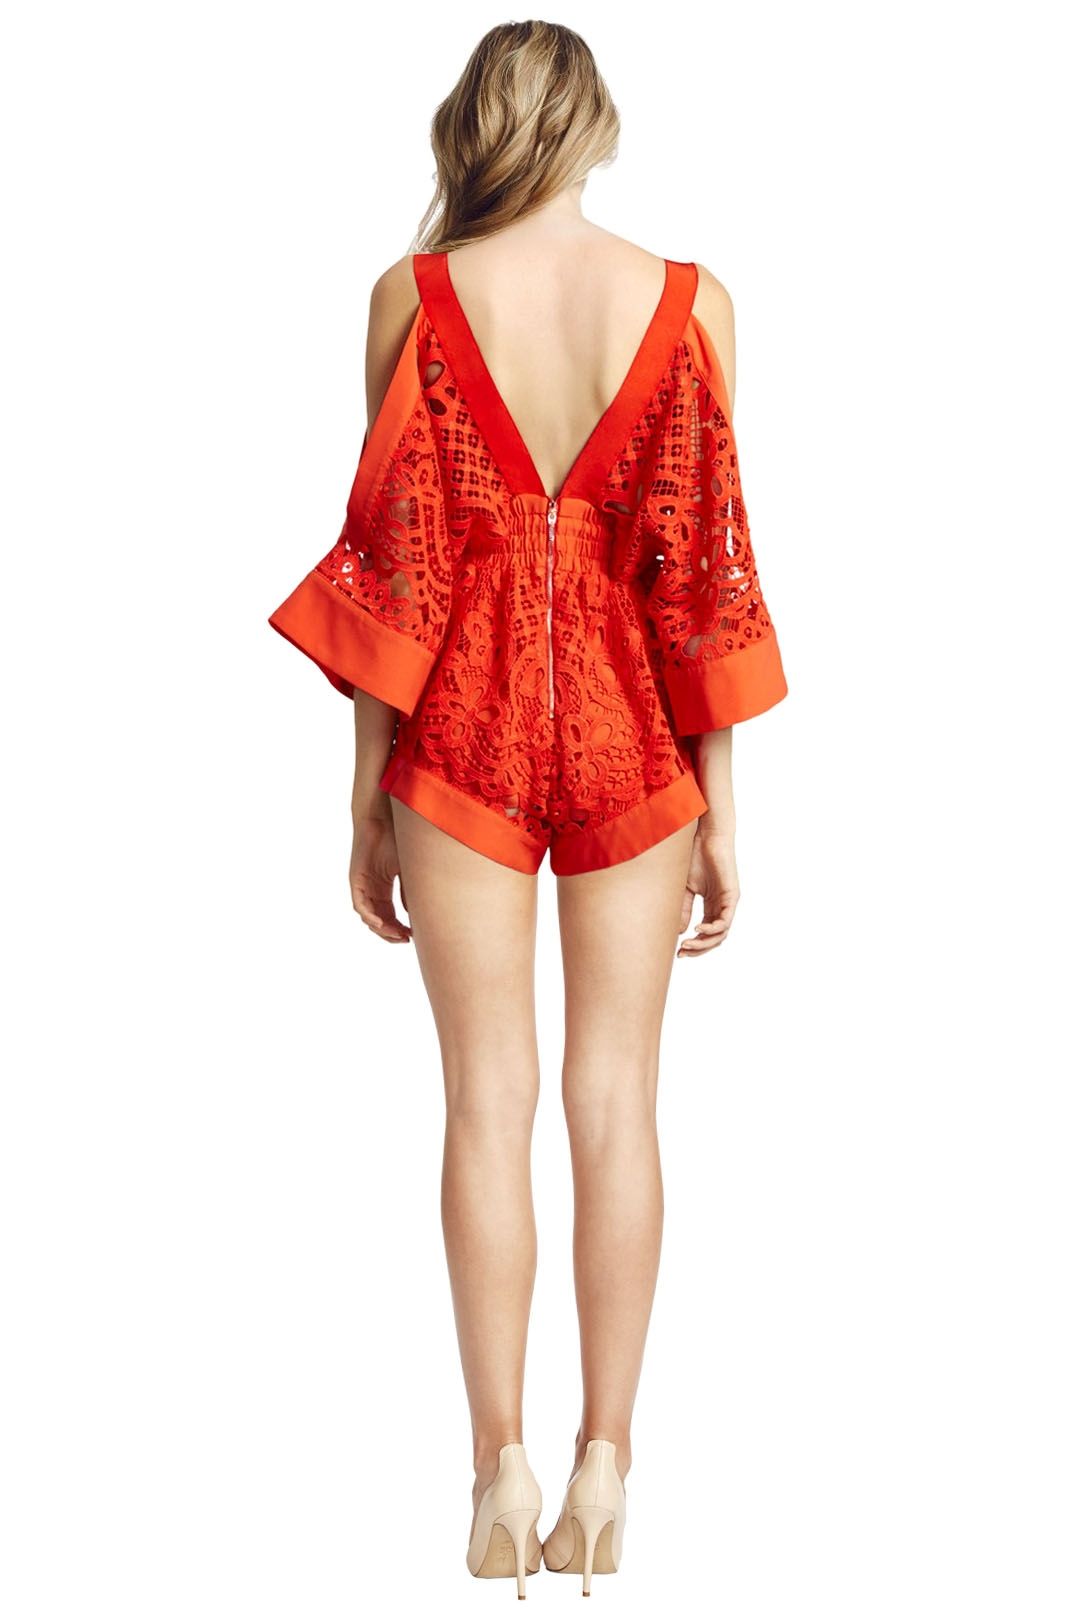 Alice McCall - Keep me there Playsuit - Red - Back